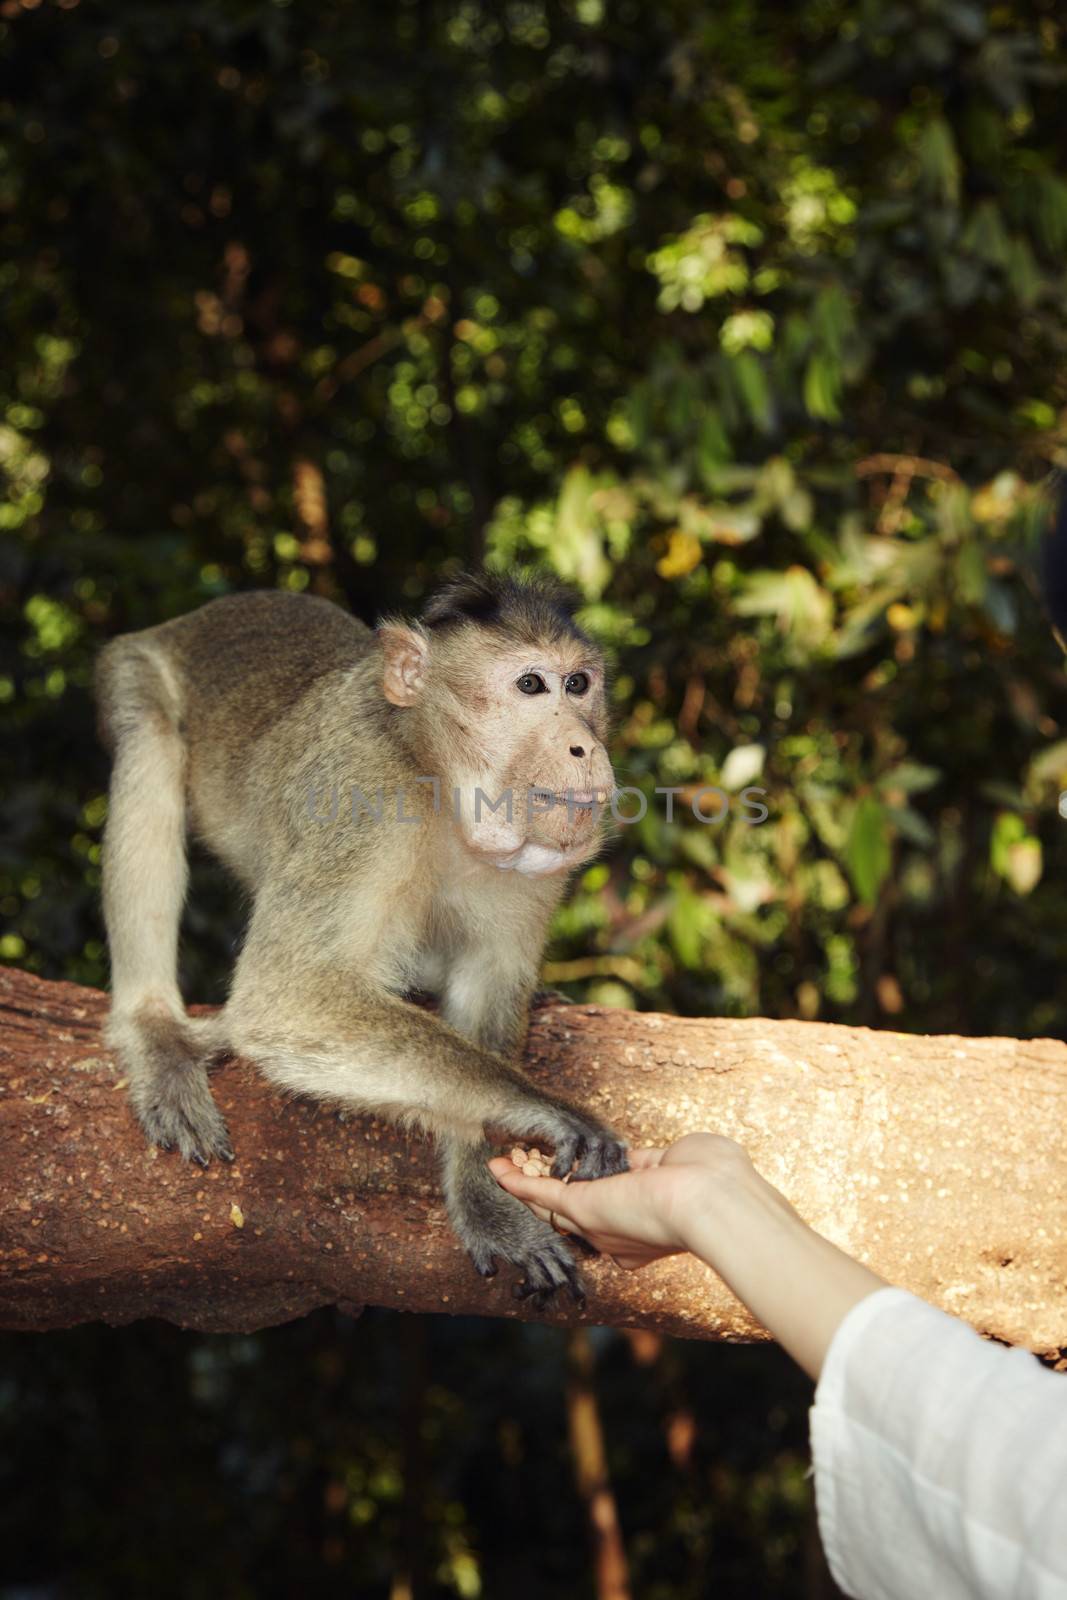 Wild monkey touching human hand in the jungle. Natural light and colors